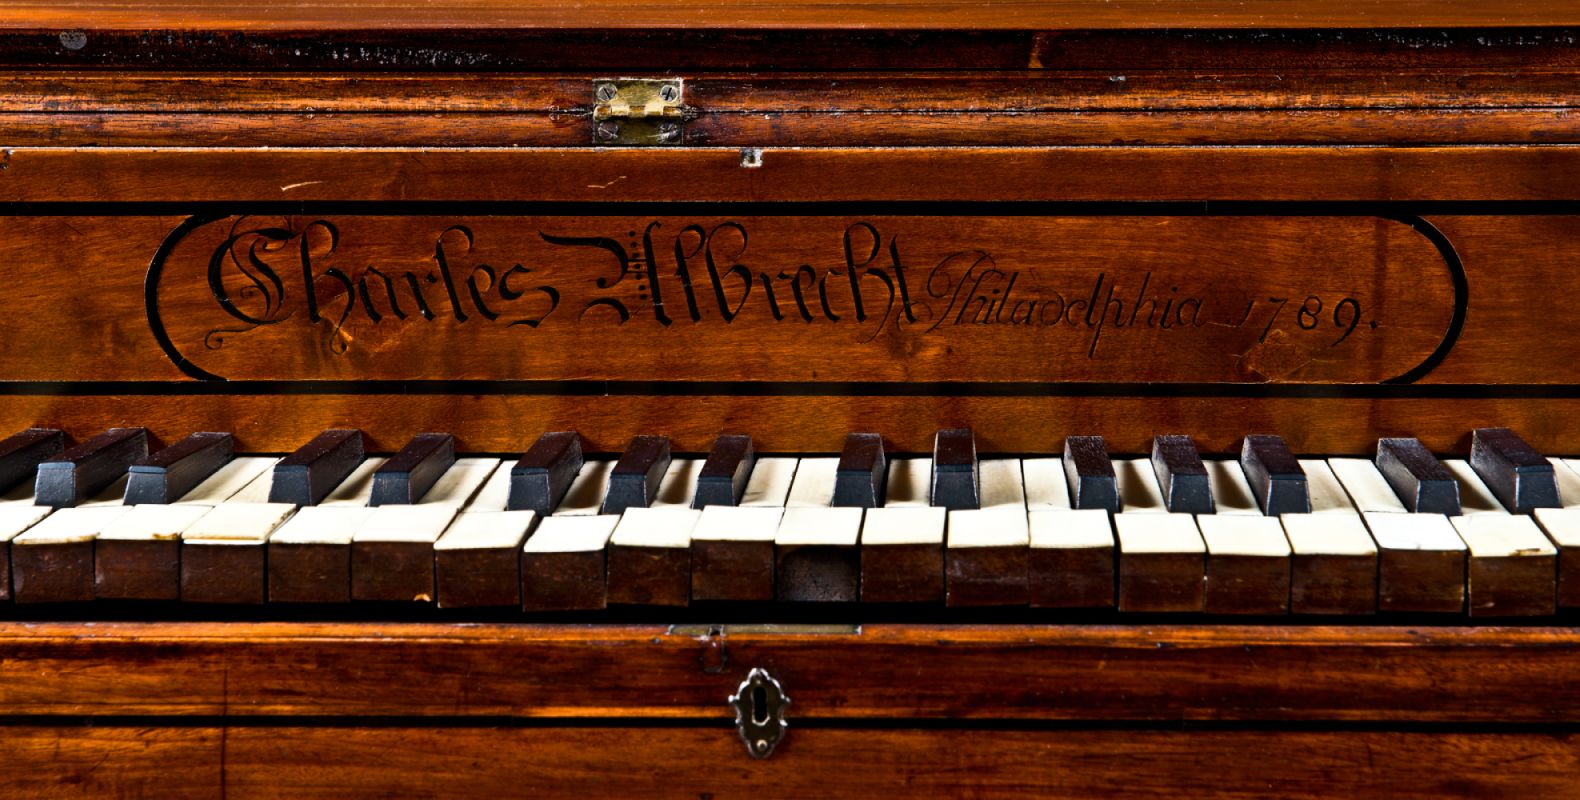 Up close view of the keys of a pianoforte.